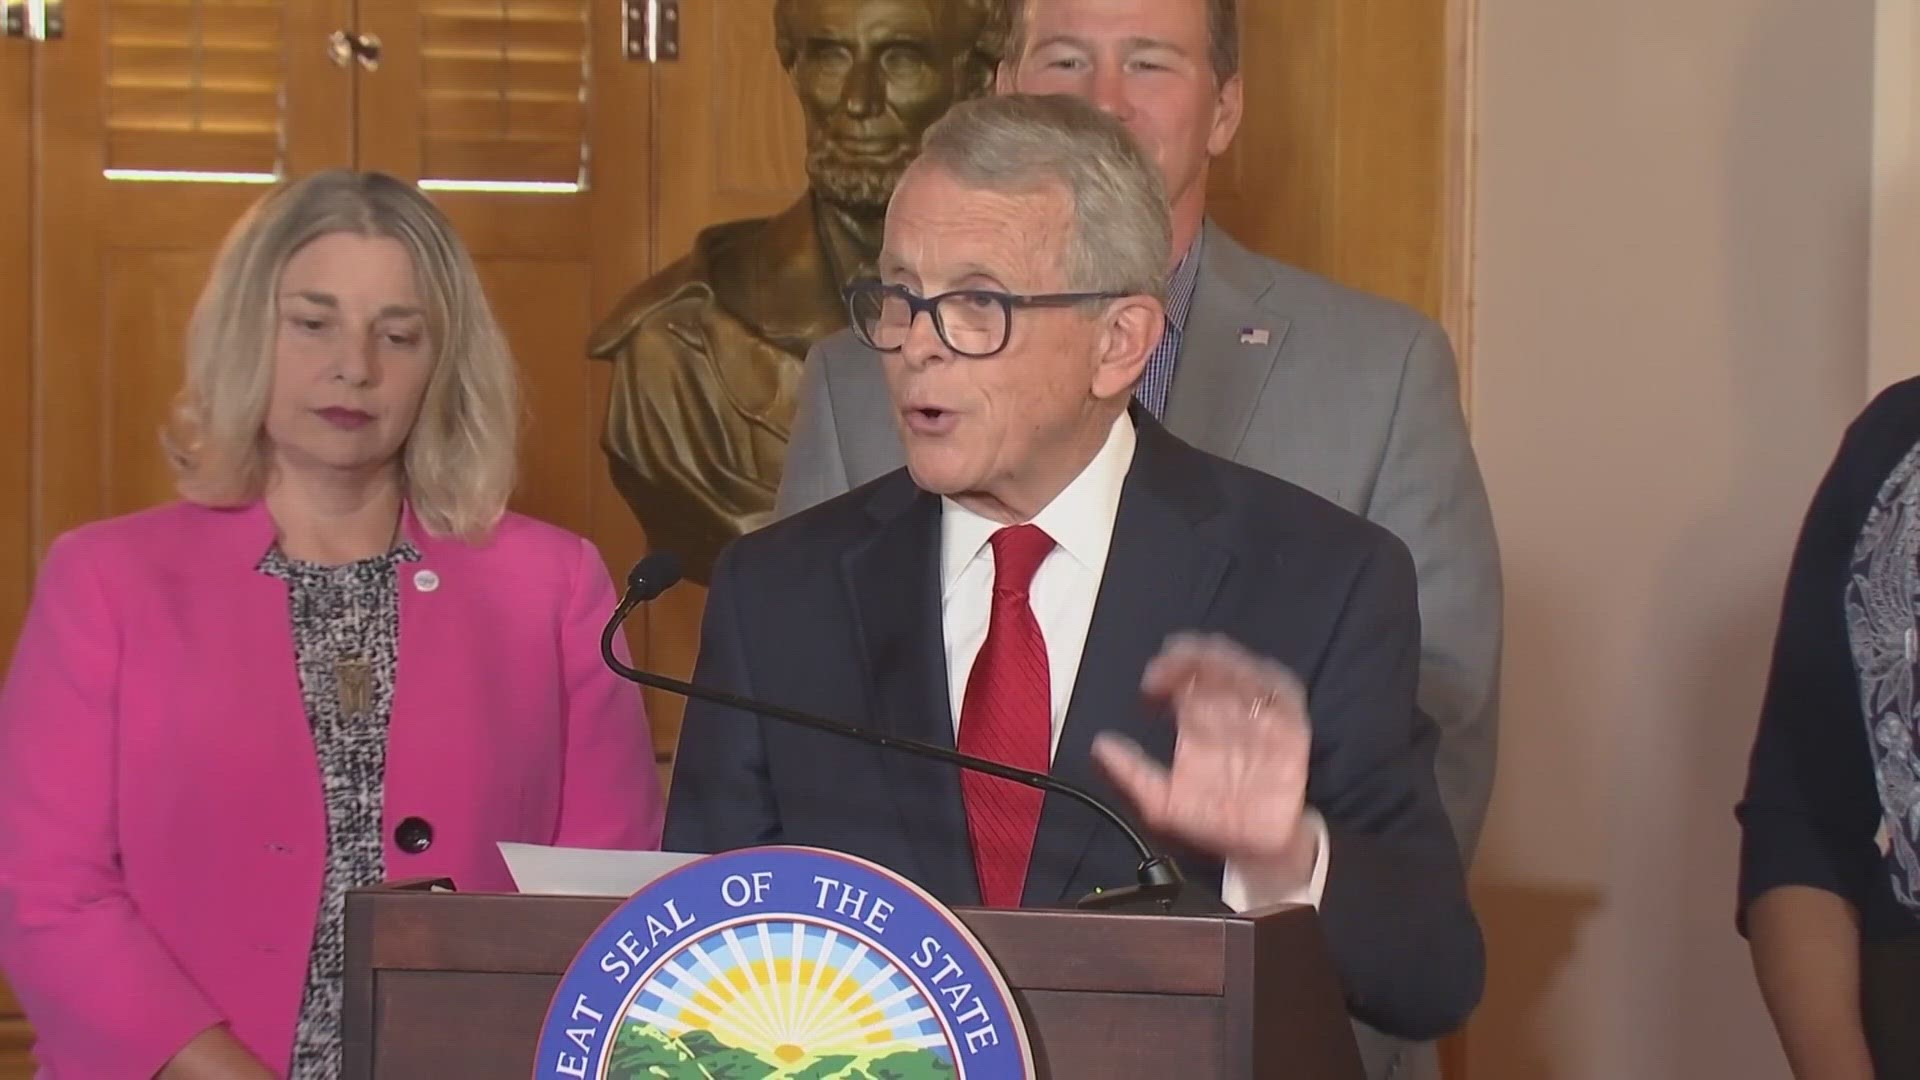 After Ohio Issue 2 passed on Tuesday, DeWine wants to make sure various protections are put in place before recreational marijuana becomes legalized on Dec. 7.